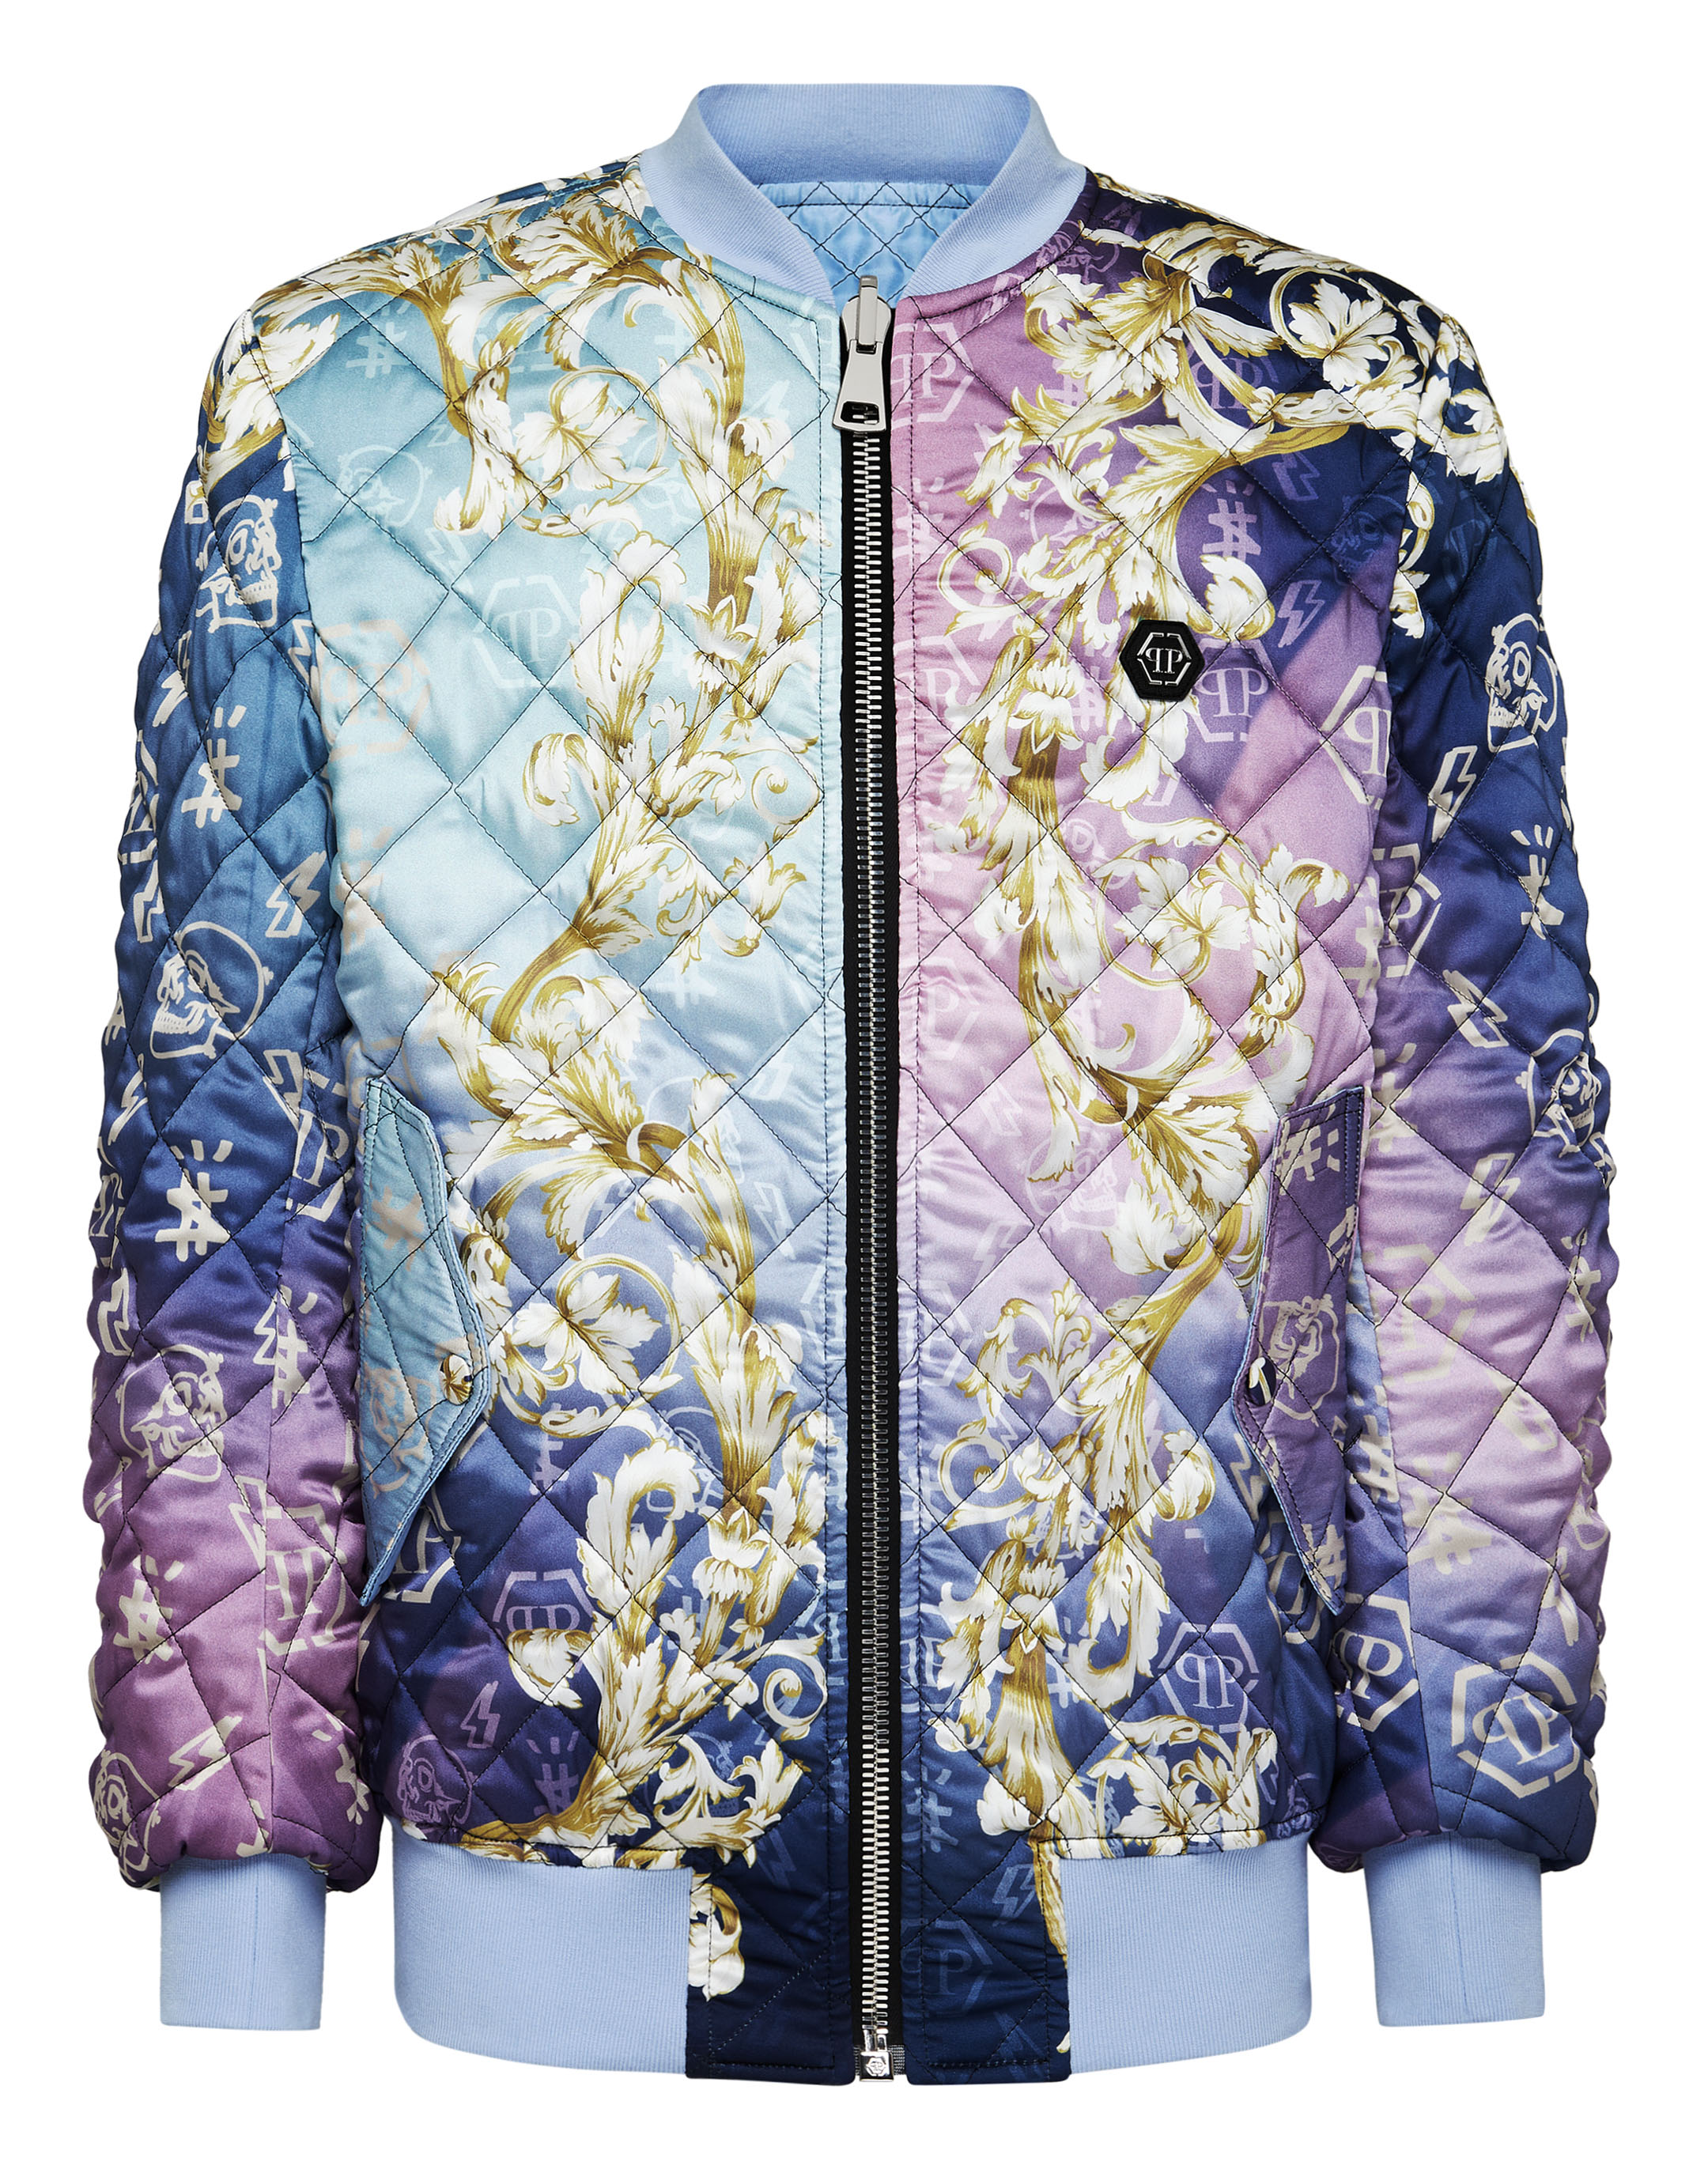 HOT Louis Vuitton Tie Dye Blue Luxury Brand Bomber Jacket Limited Edition